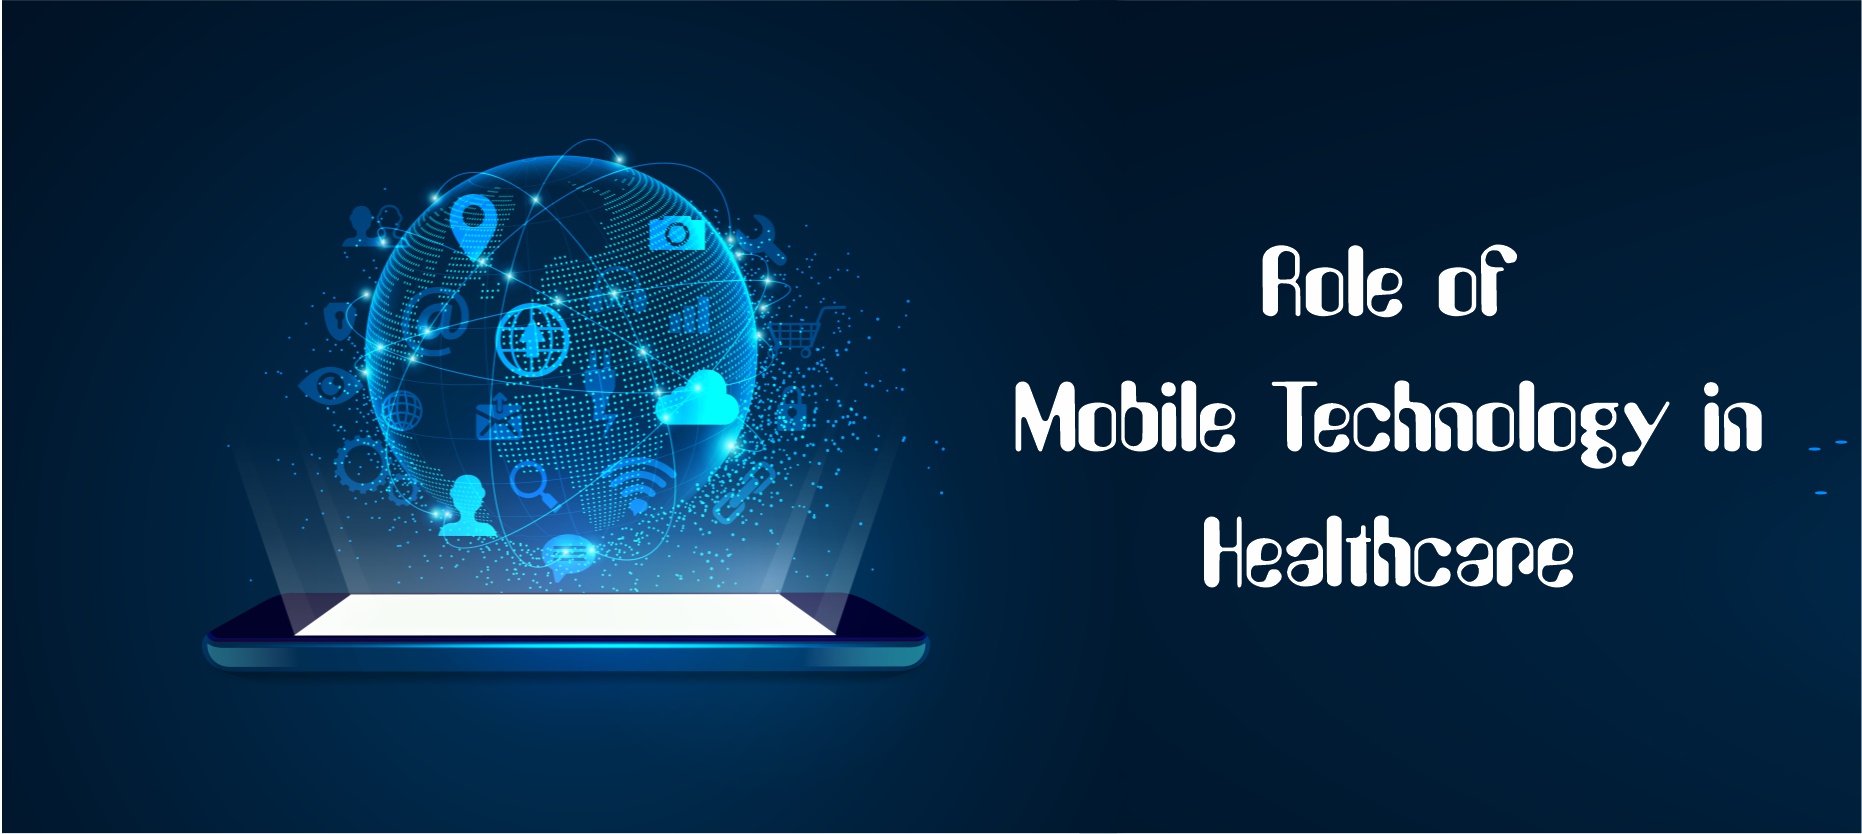 Role of Mobile Technology in Healthcare